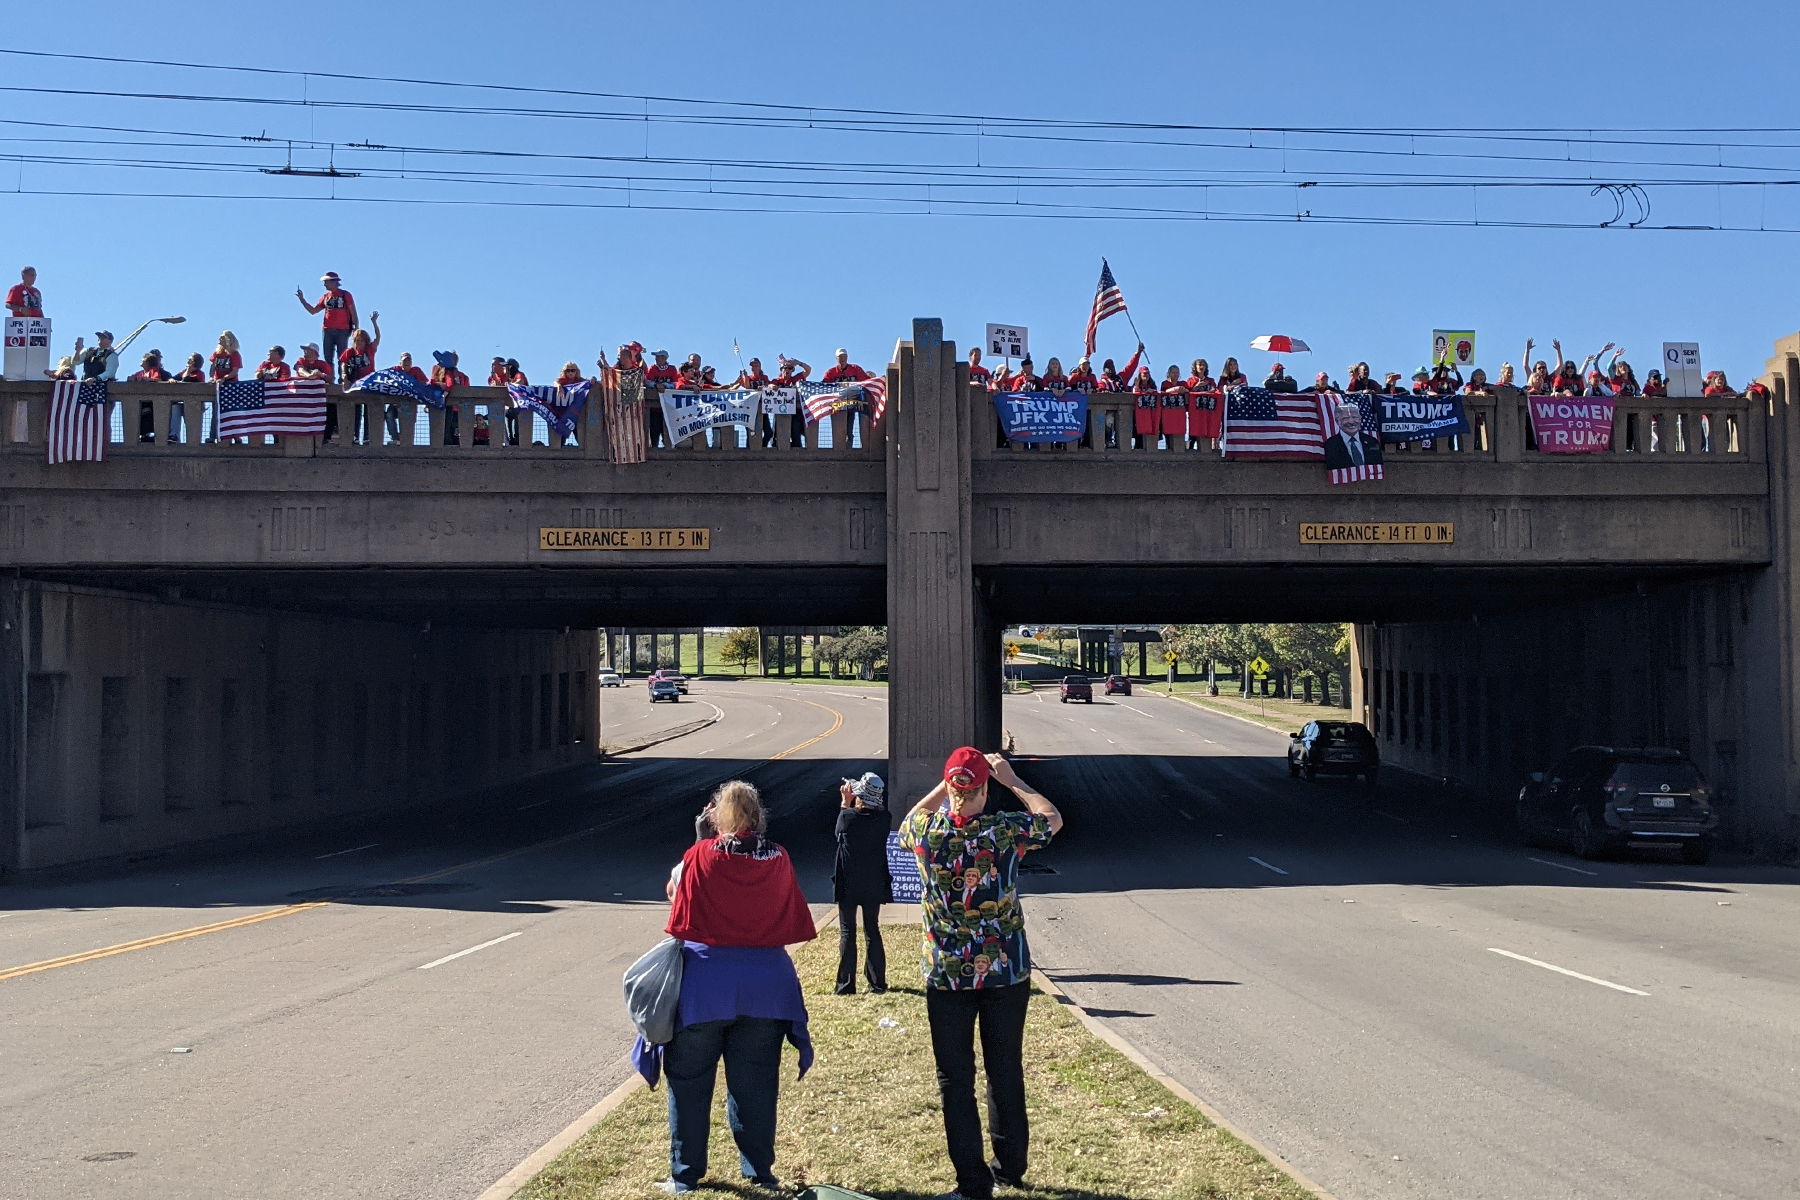 Dallas: Traditional JFK conspiracy theorists and QAnon fans meet up